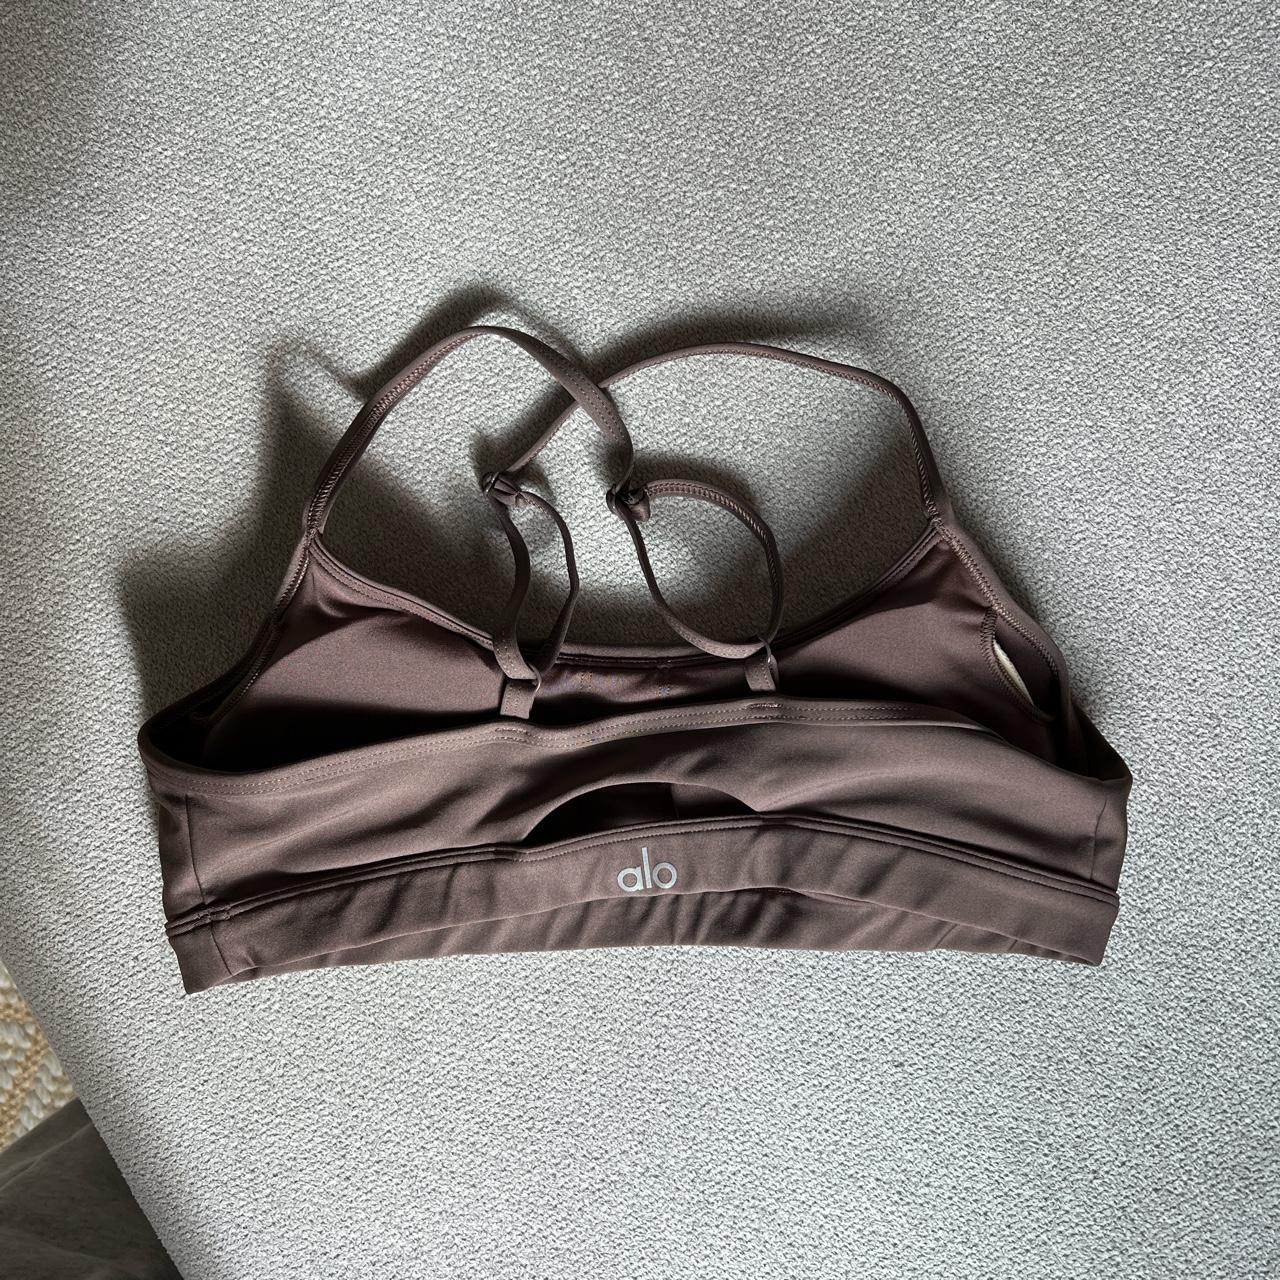 Alo Yoga airlift intrigue bra in hot chocolate - Depop